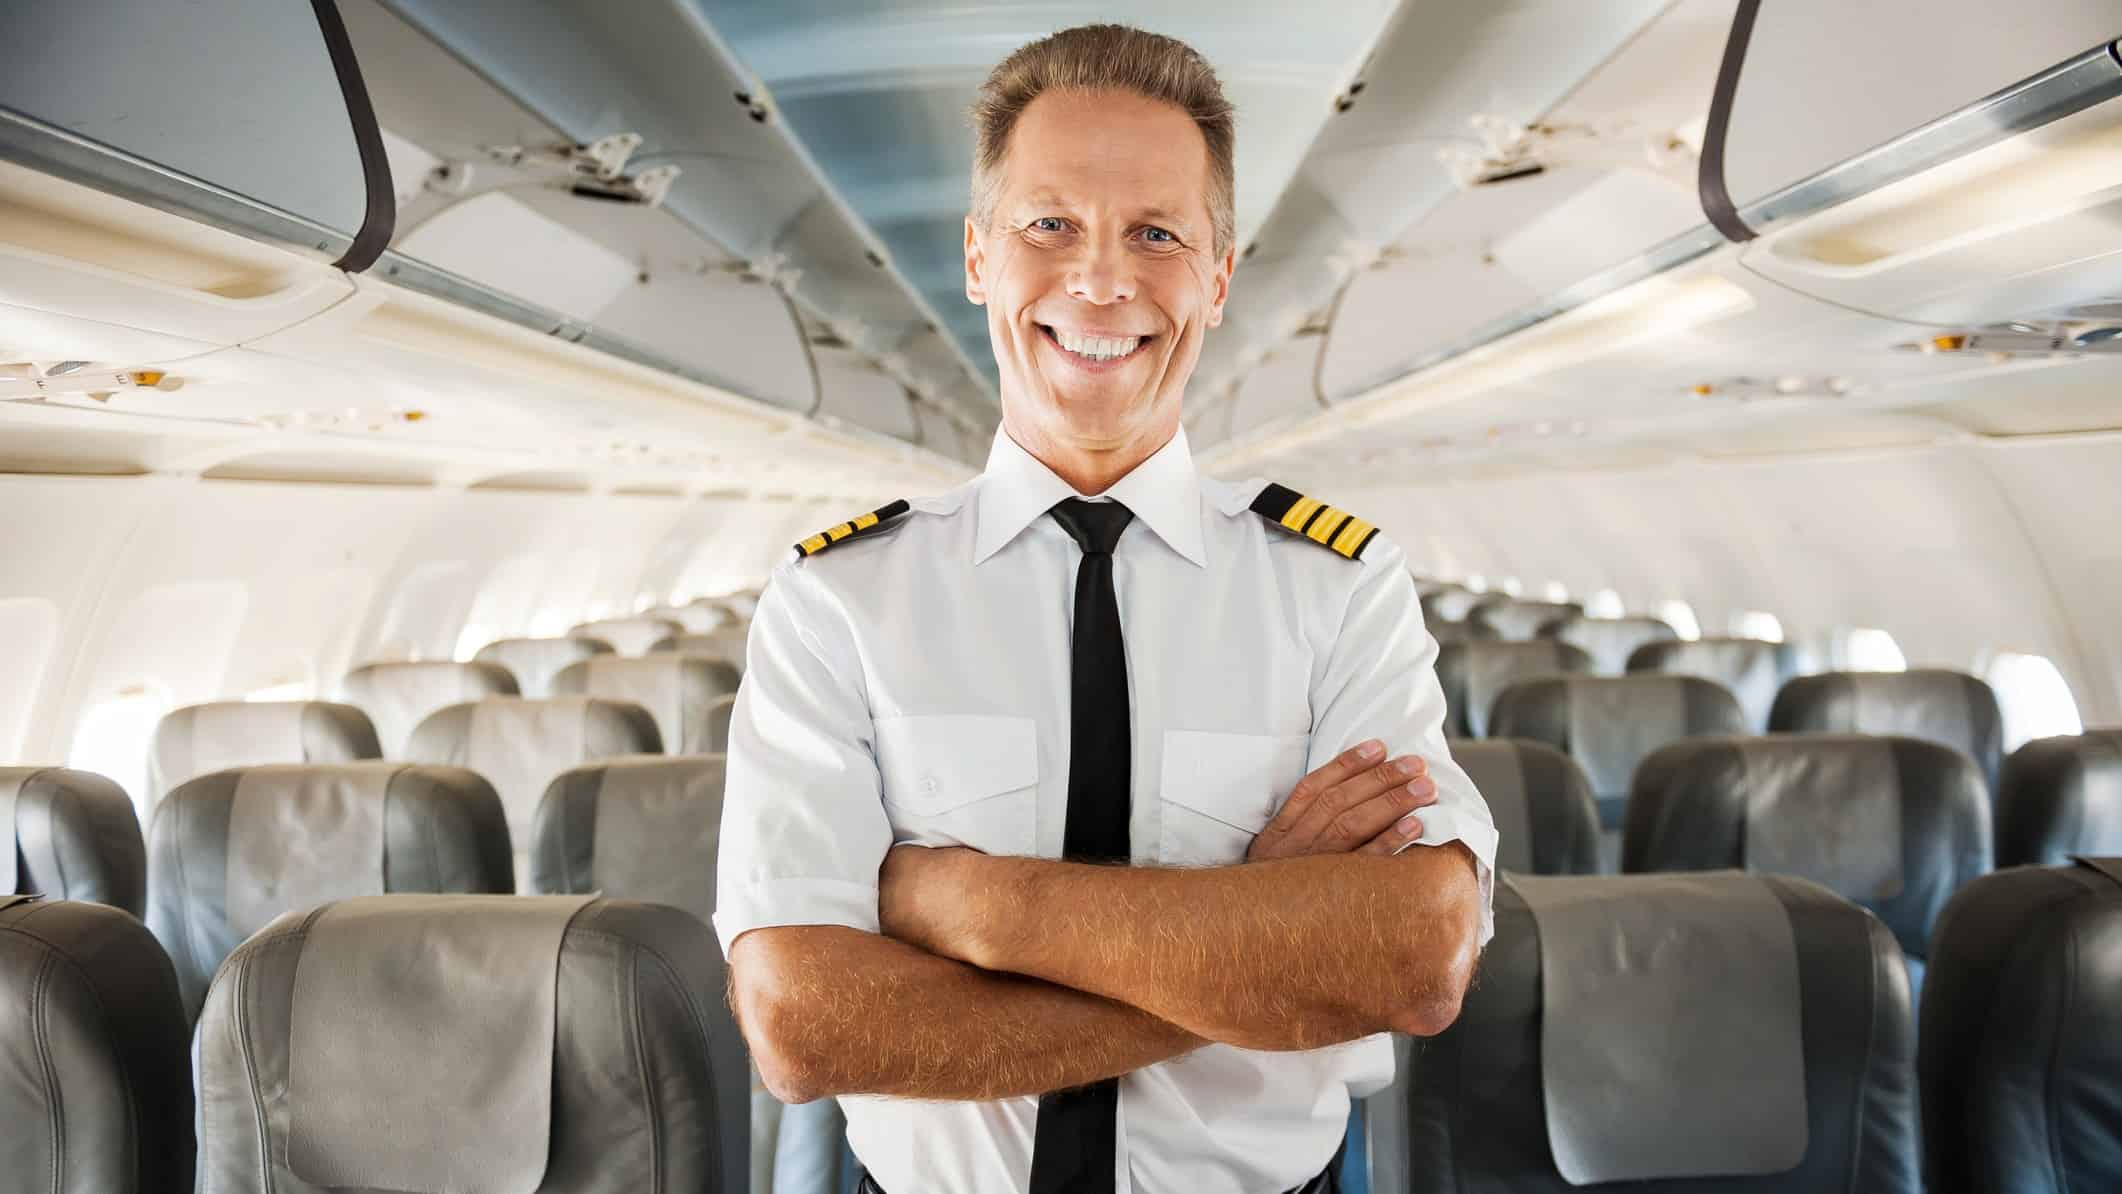 A Qantas pilot stands in an empty passenger cabin smiling with his arms crossed feeling excited about international travel resuming